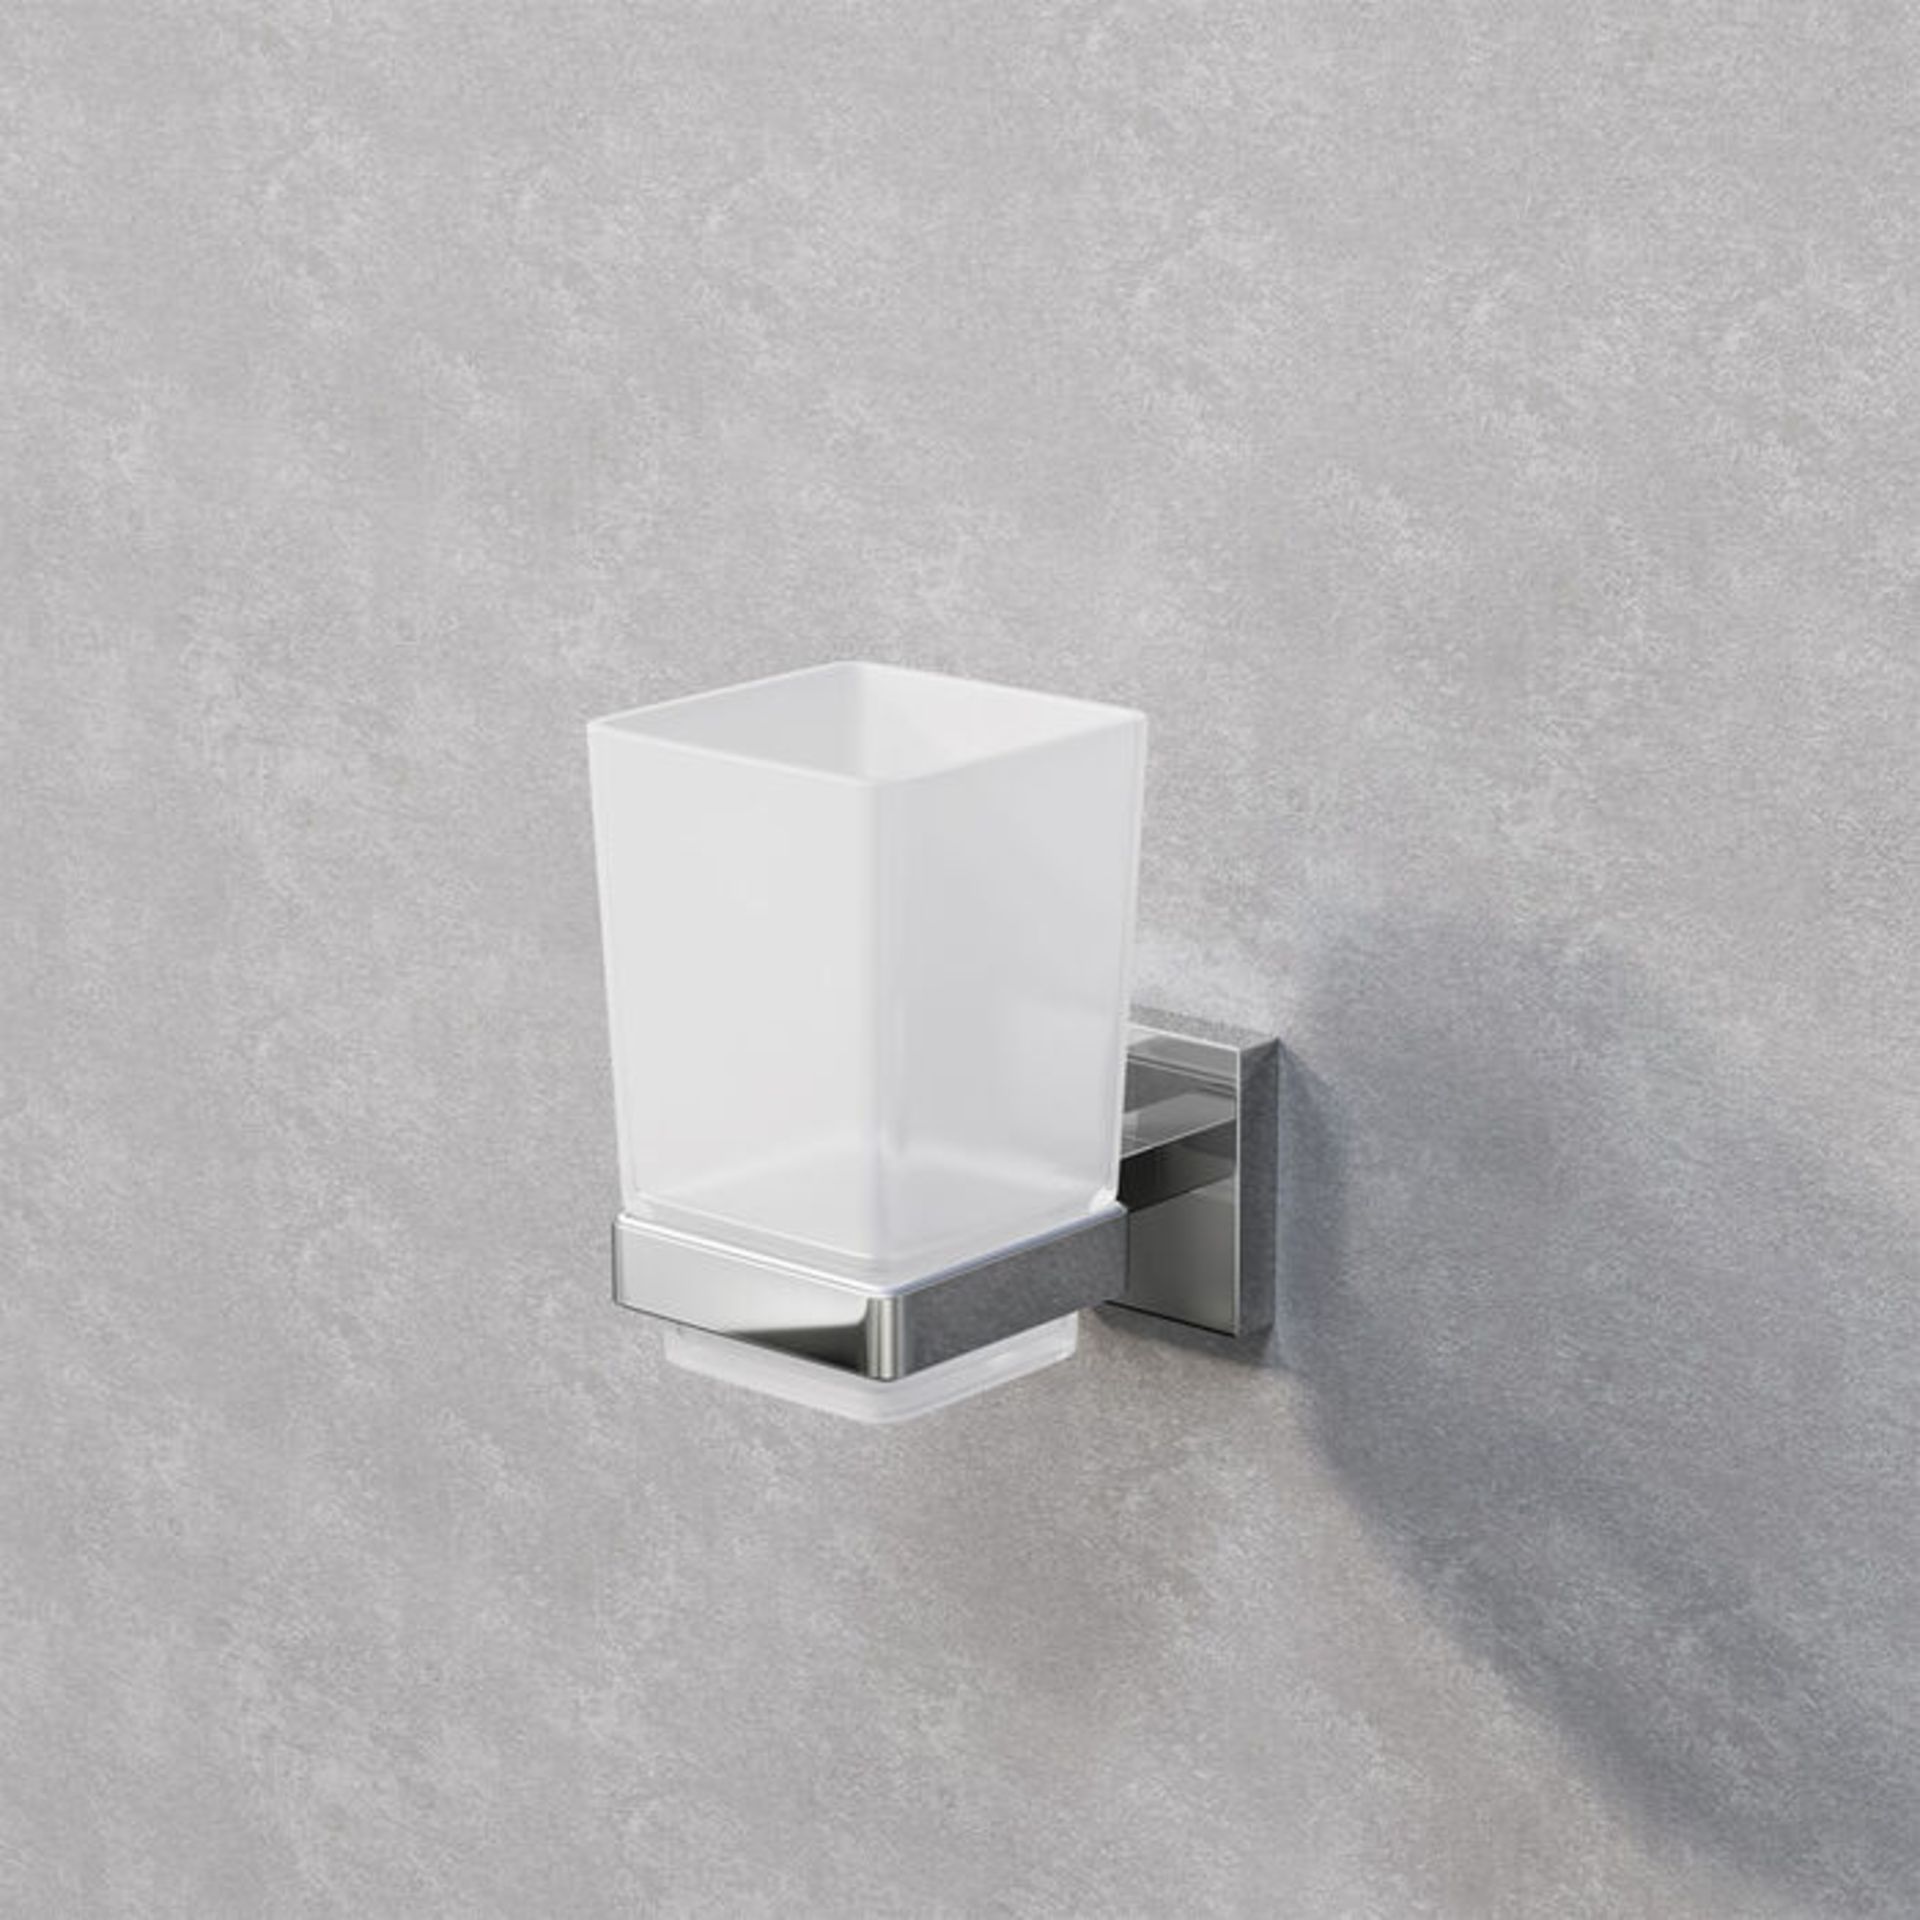 (Z1019) Jesmond Tumbler Holder Finishes your bathroom with a little extra functionality and st... - Image 2 of 2